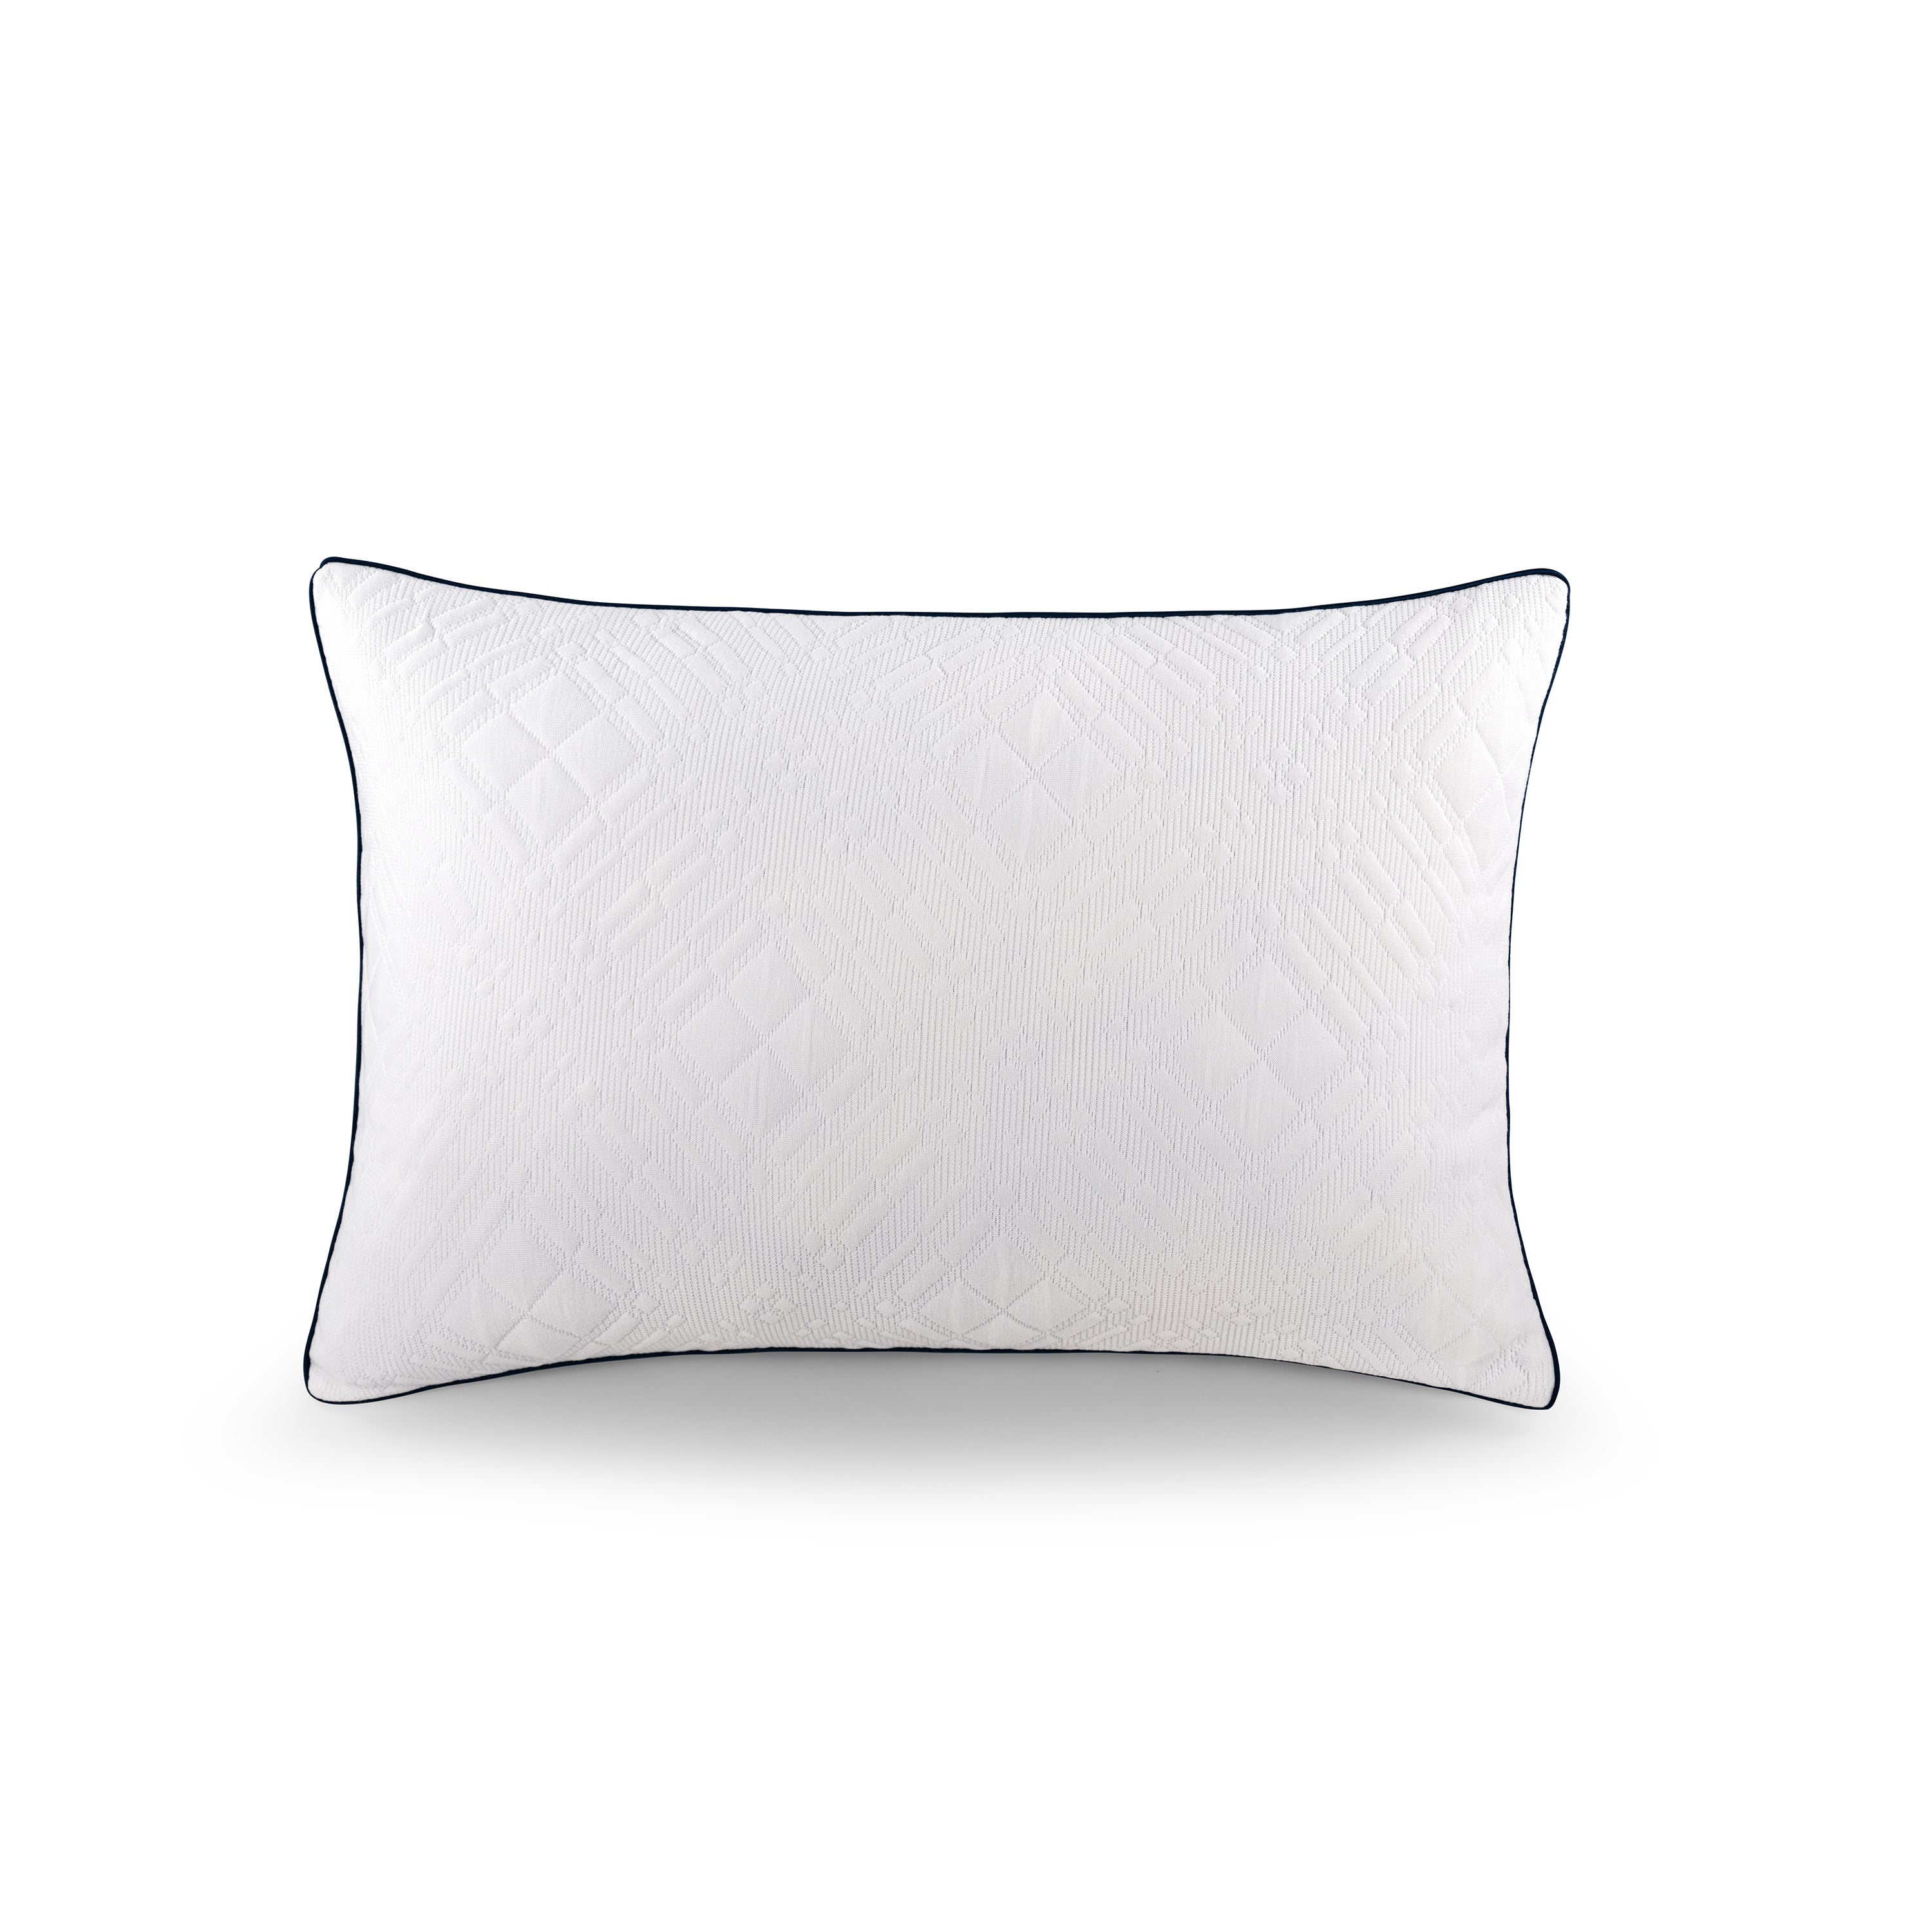 Luxury Knit Awake Refreshed Down Alternative Pillows | 2-Pack